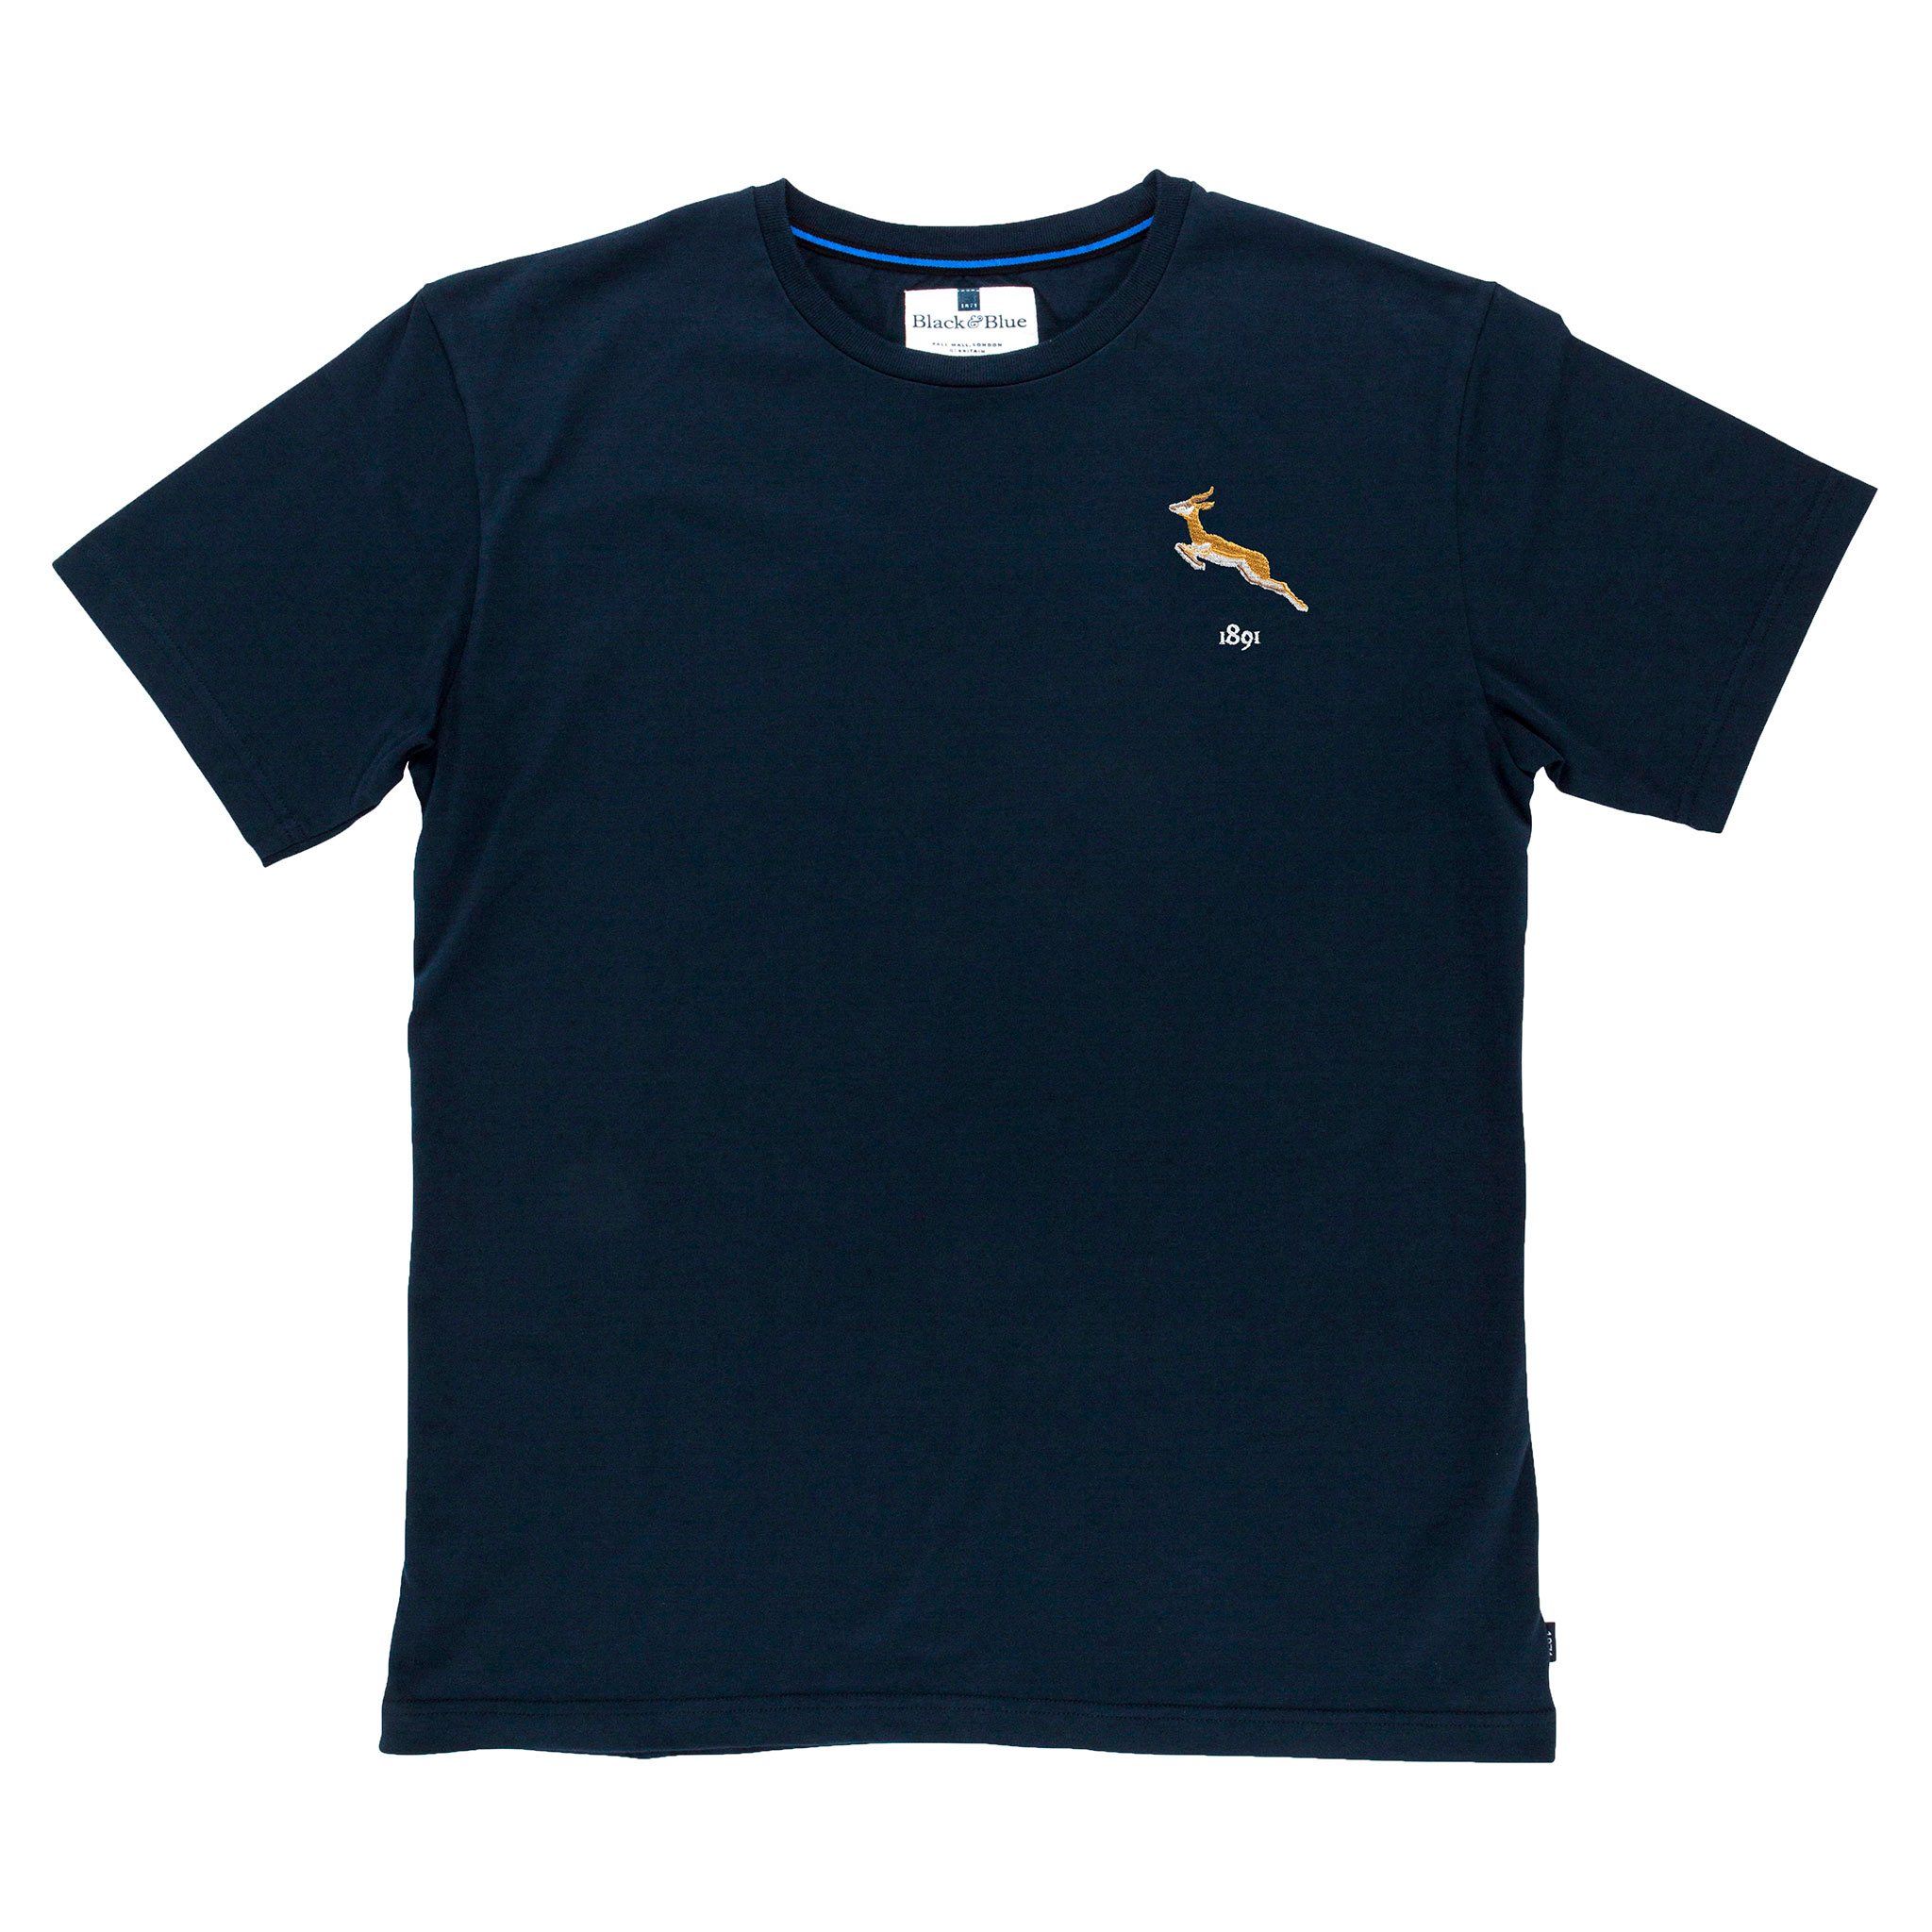 South Africa 1891 Navy Tshirt_Front